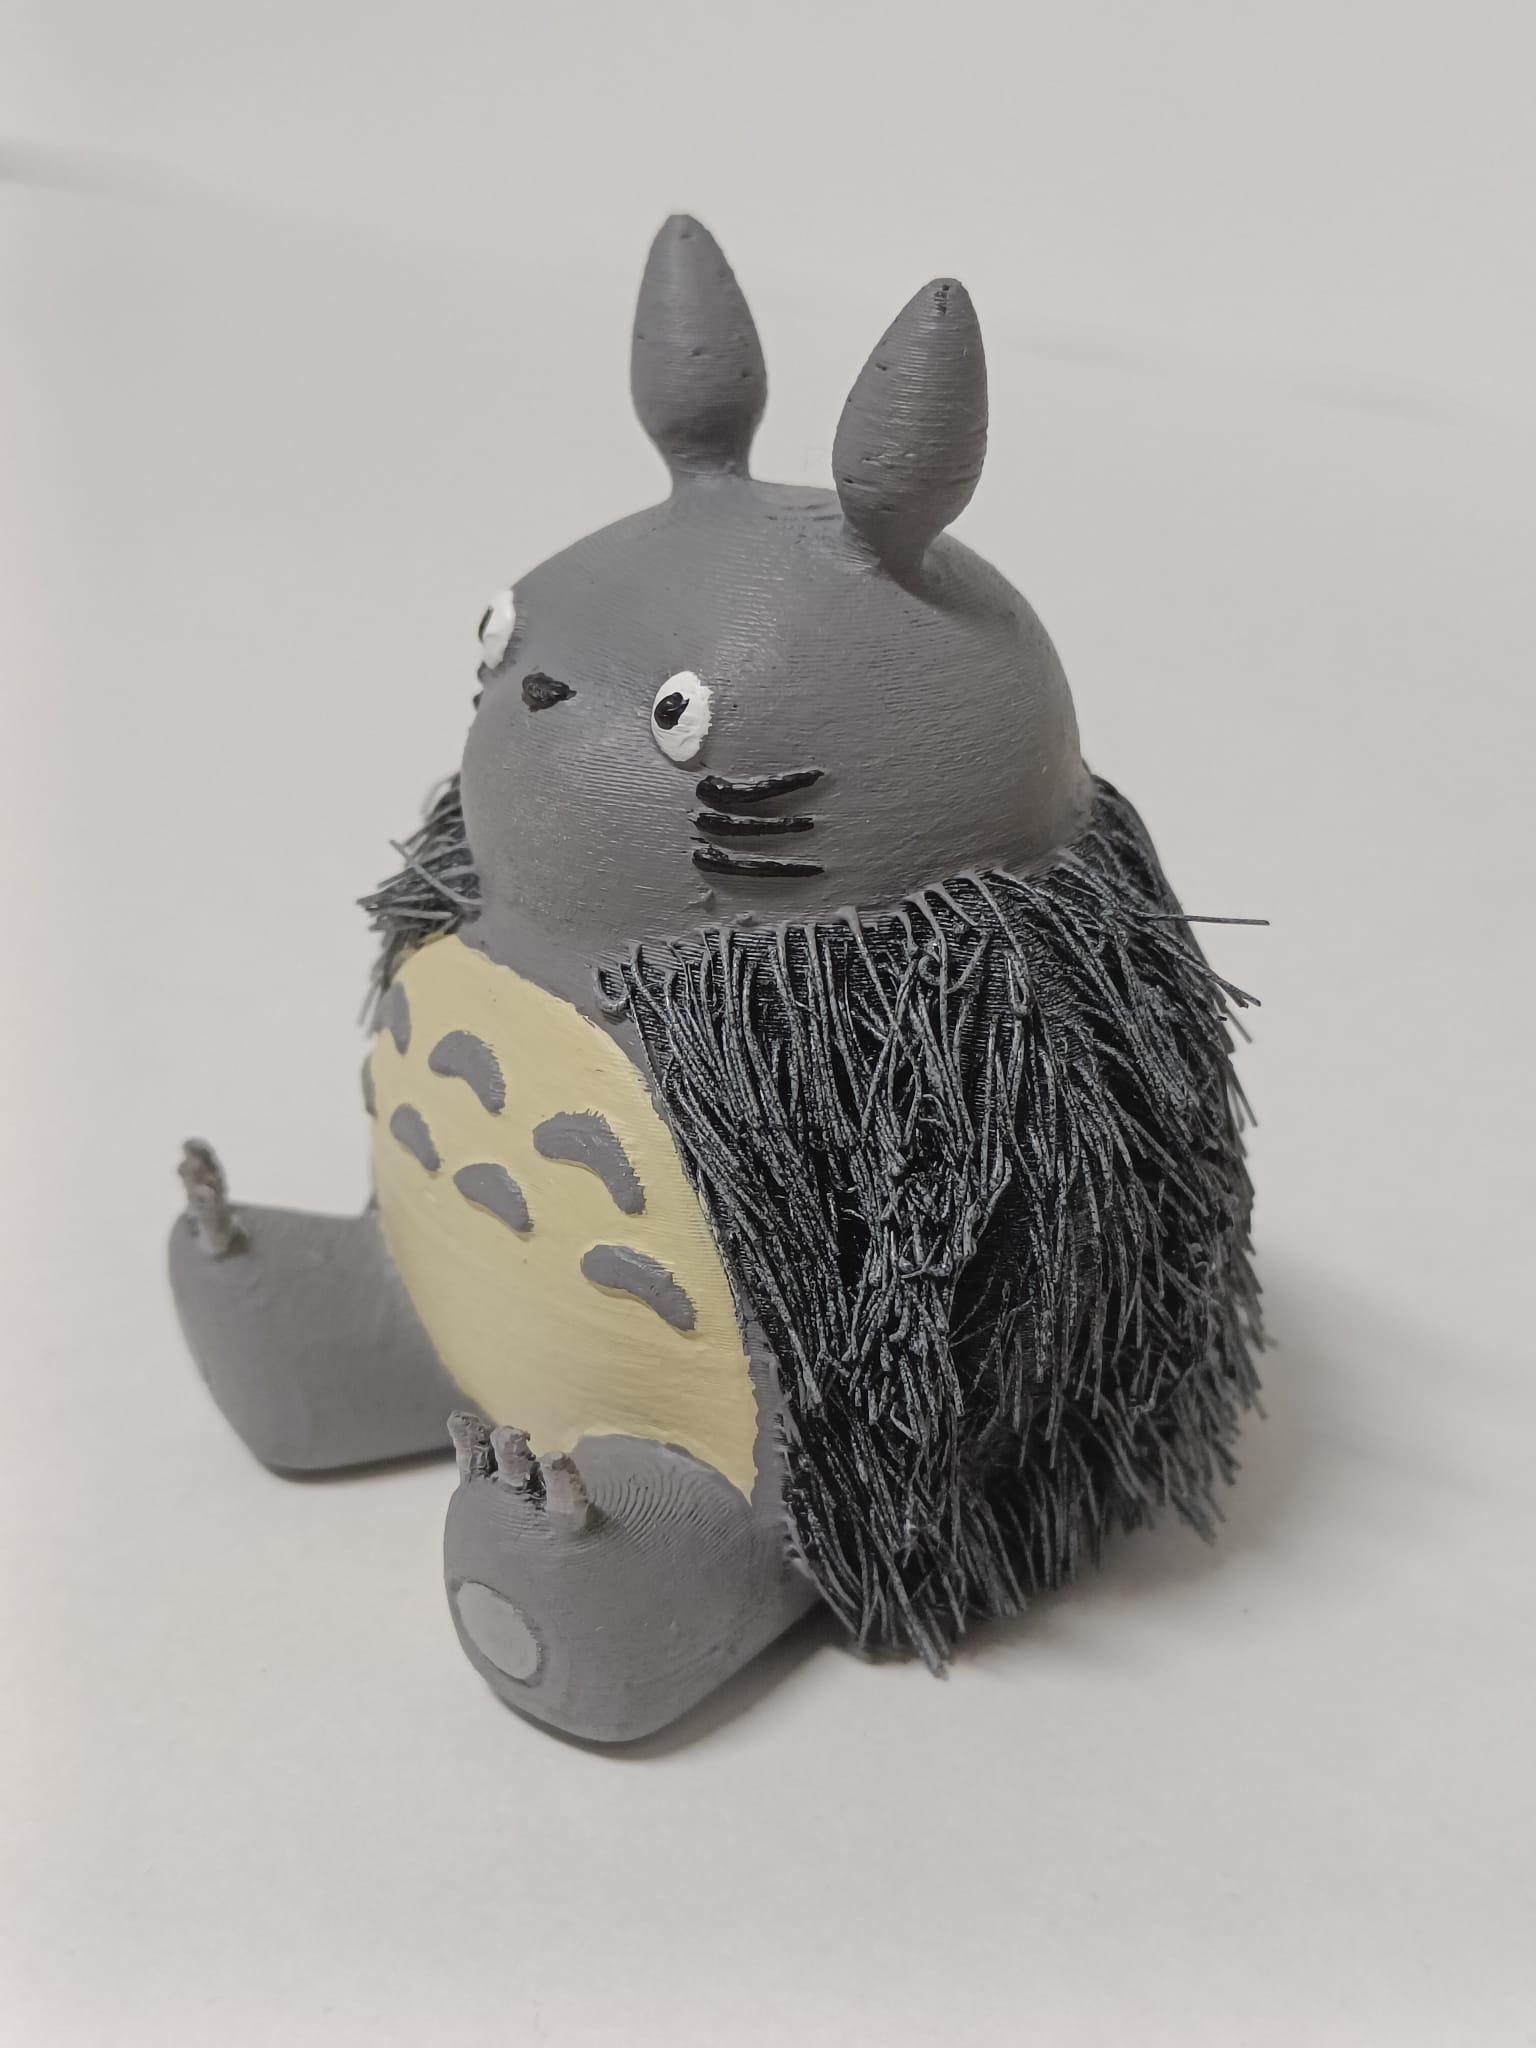 Winter Totoro remixed with Hairify 3d model